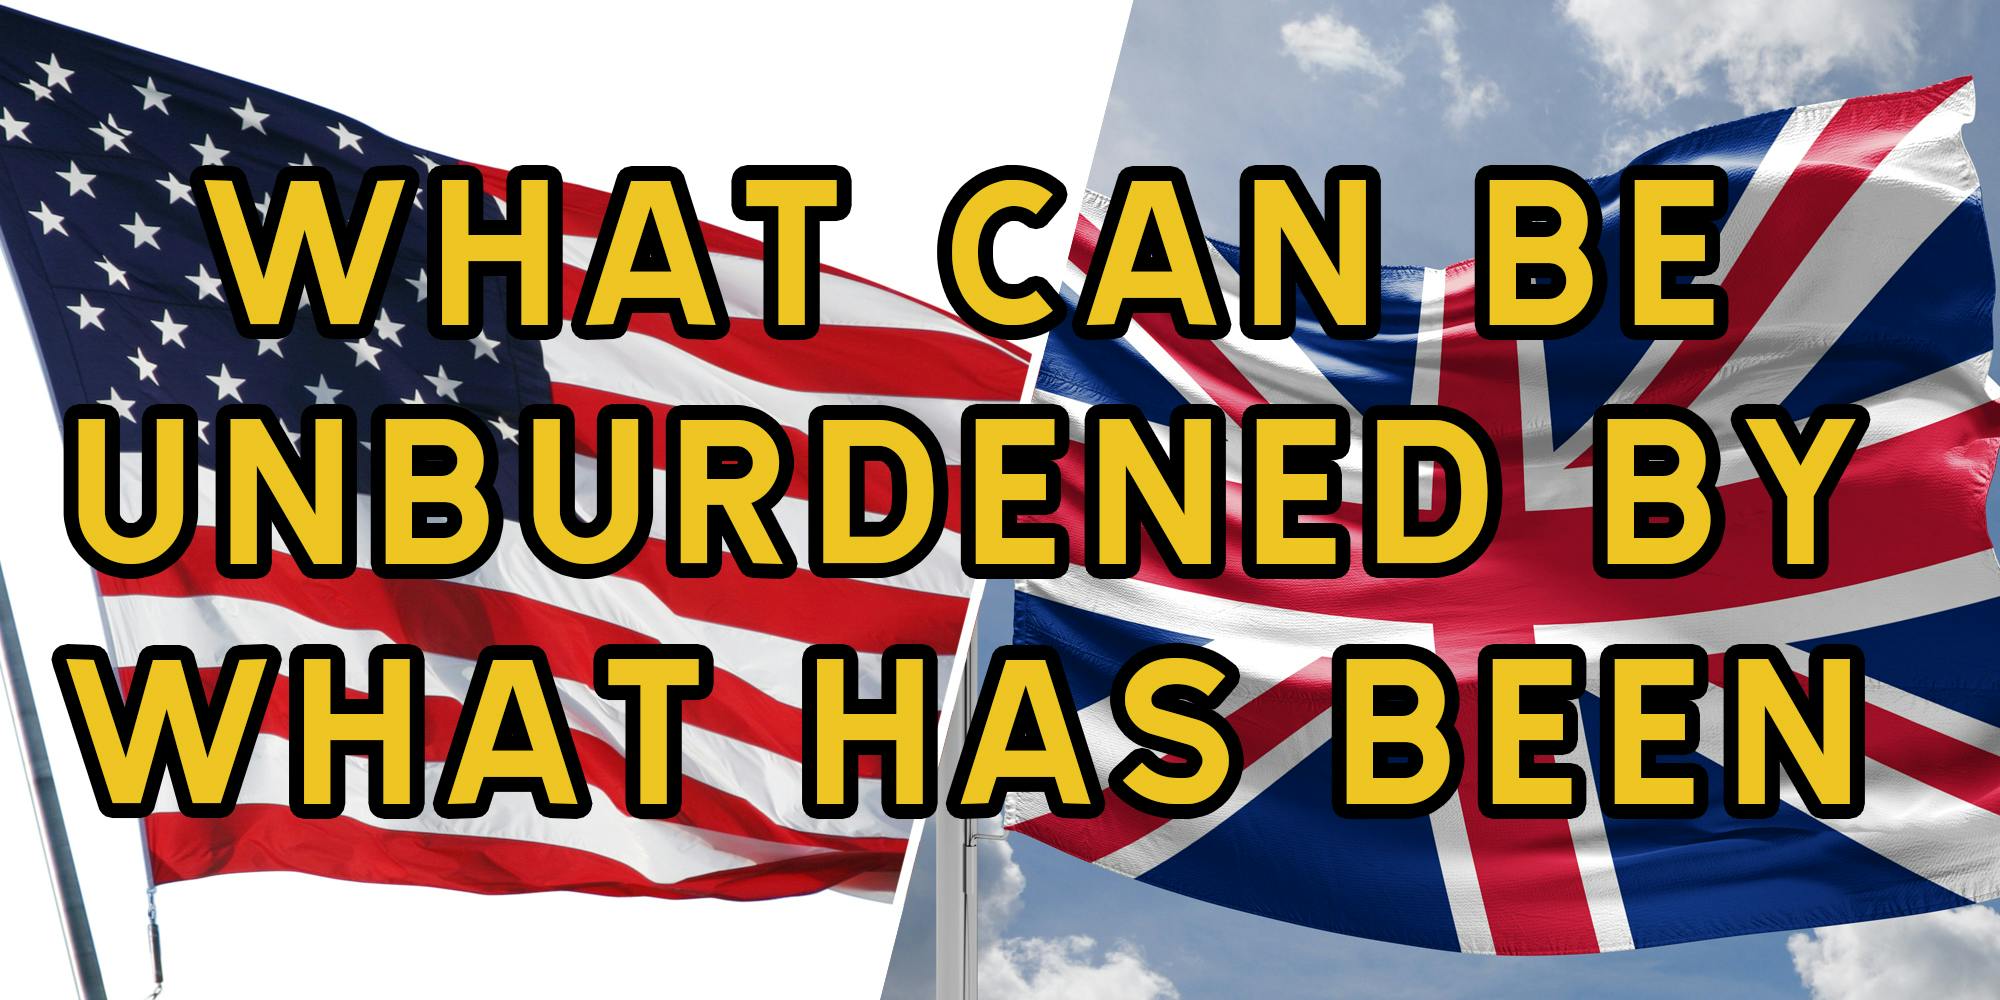 US flag (l), UK flag(r) with text over it saying "what can be unburdened by what has been"